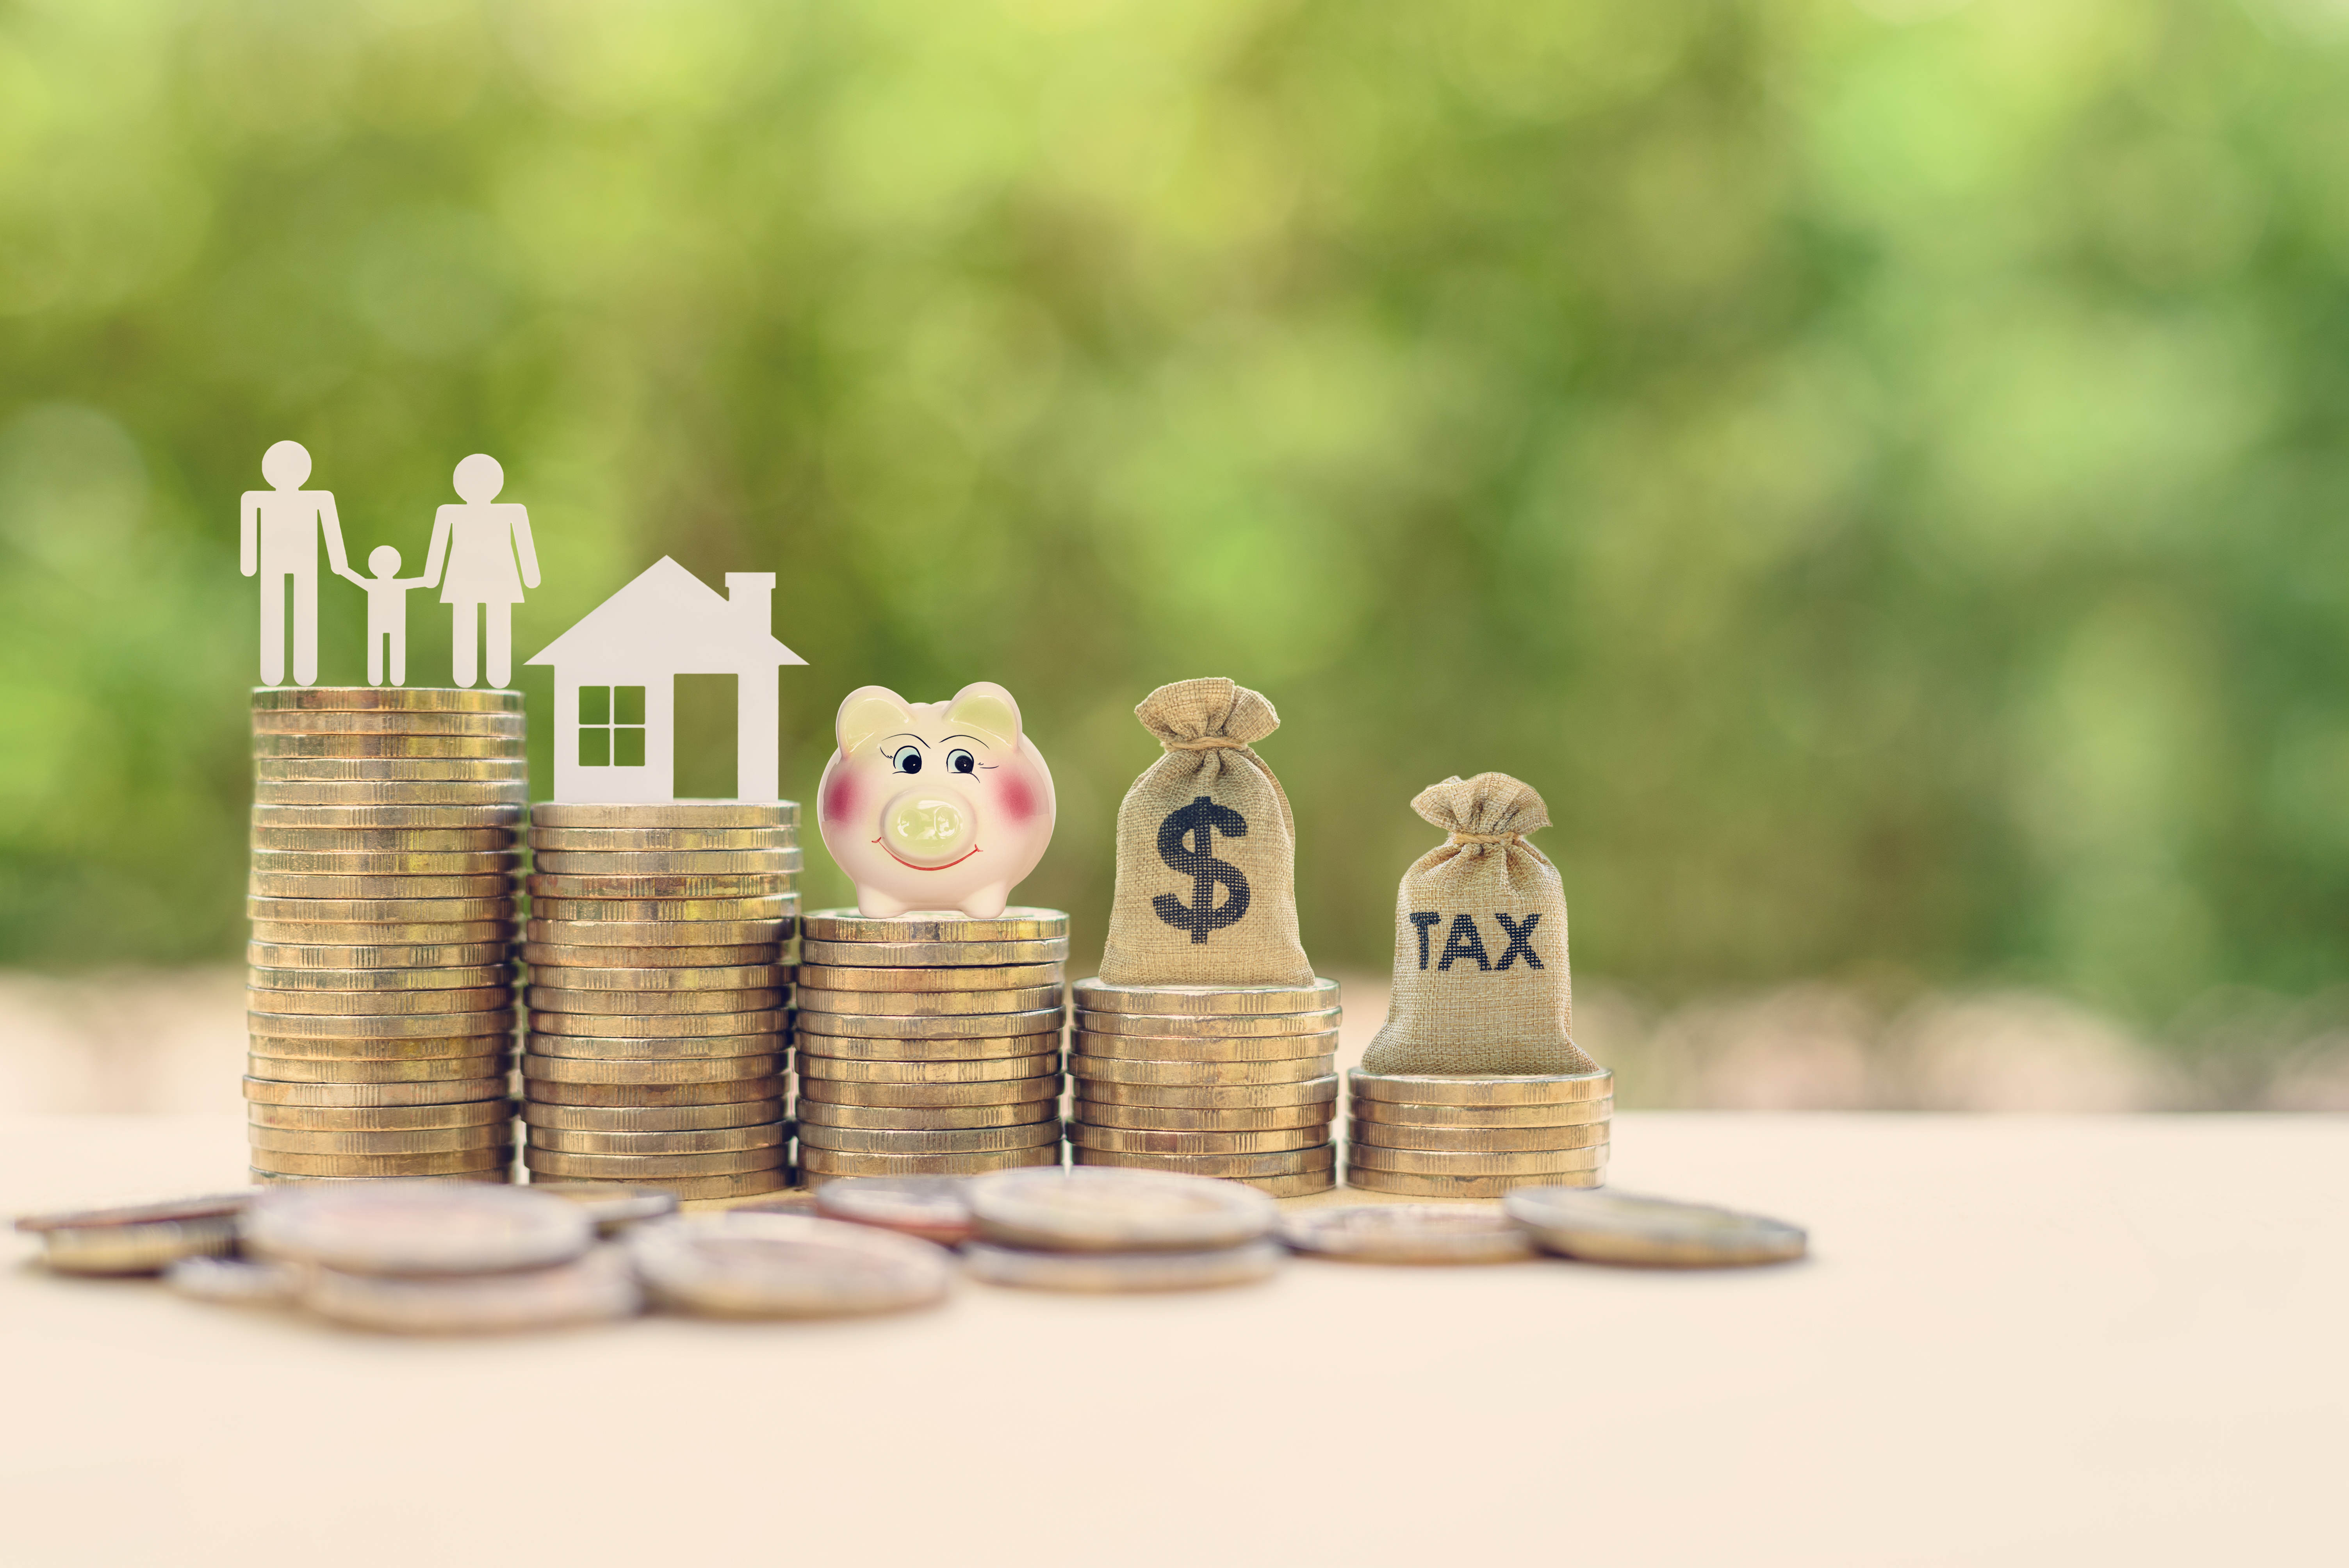 Image of a family, house, piggybank and bags of money stacked on top of coins to represent estate planning.